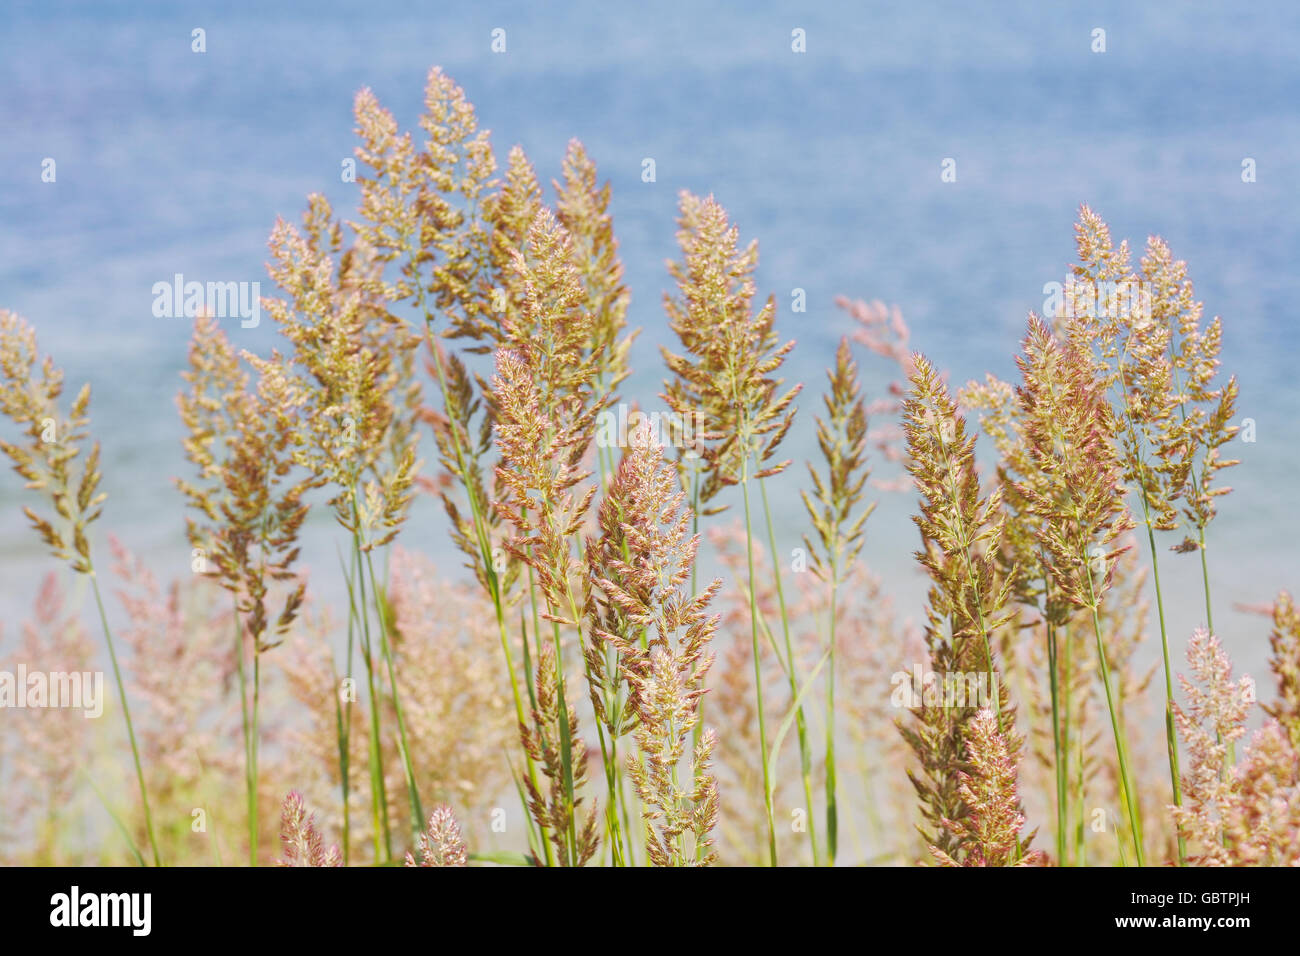 Reeds on the background of the pond Stock Photo